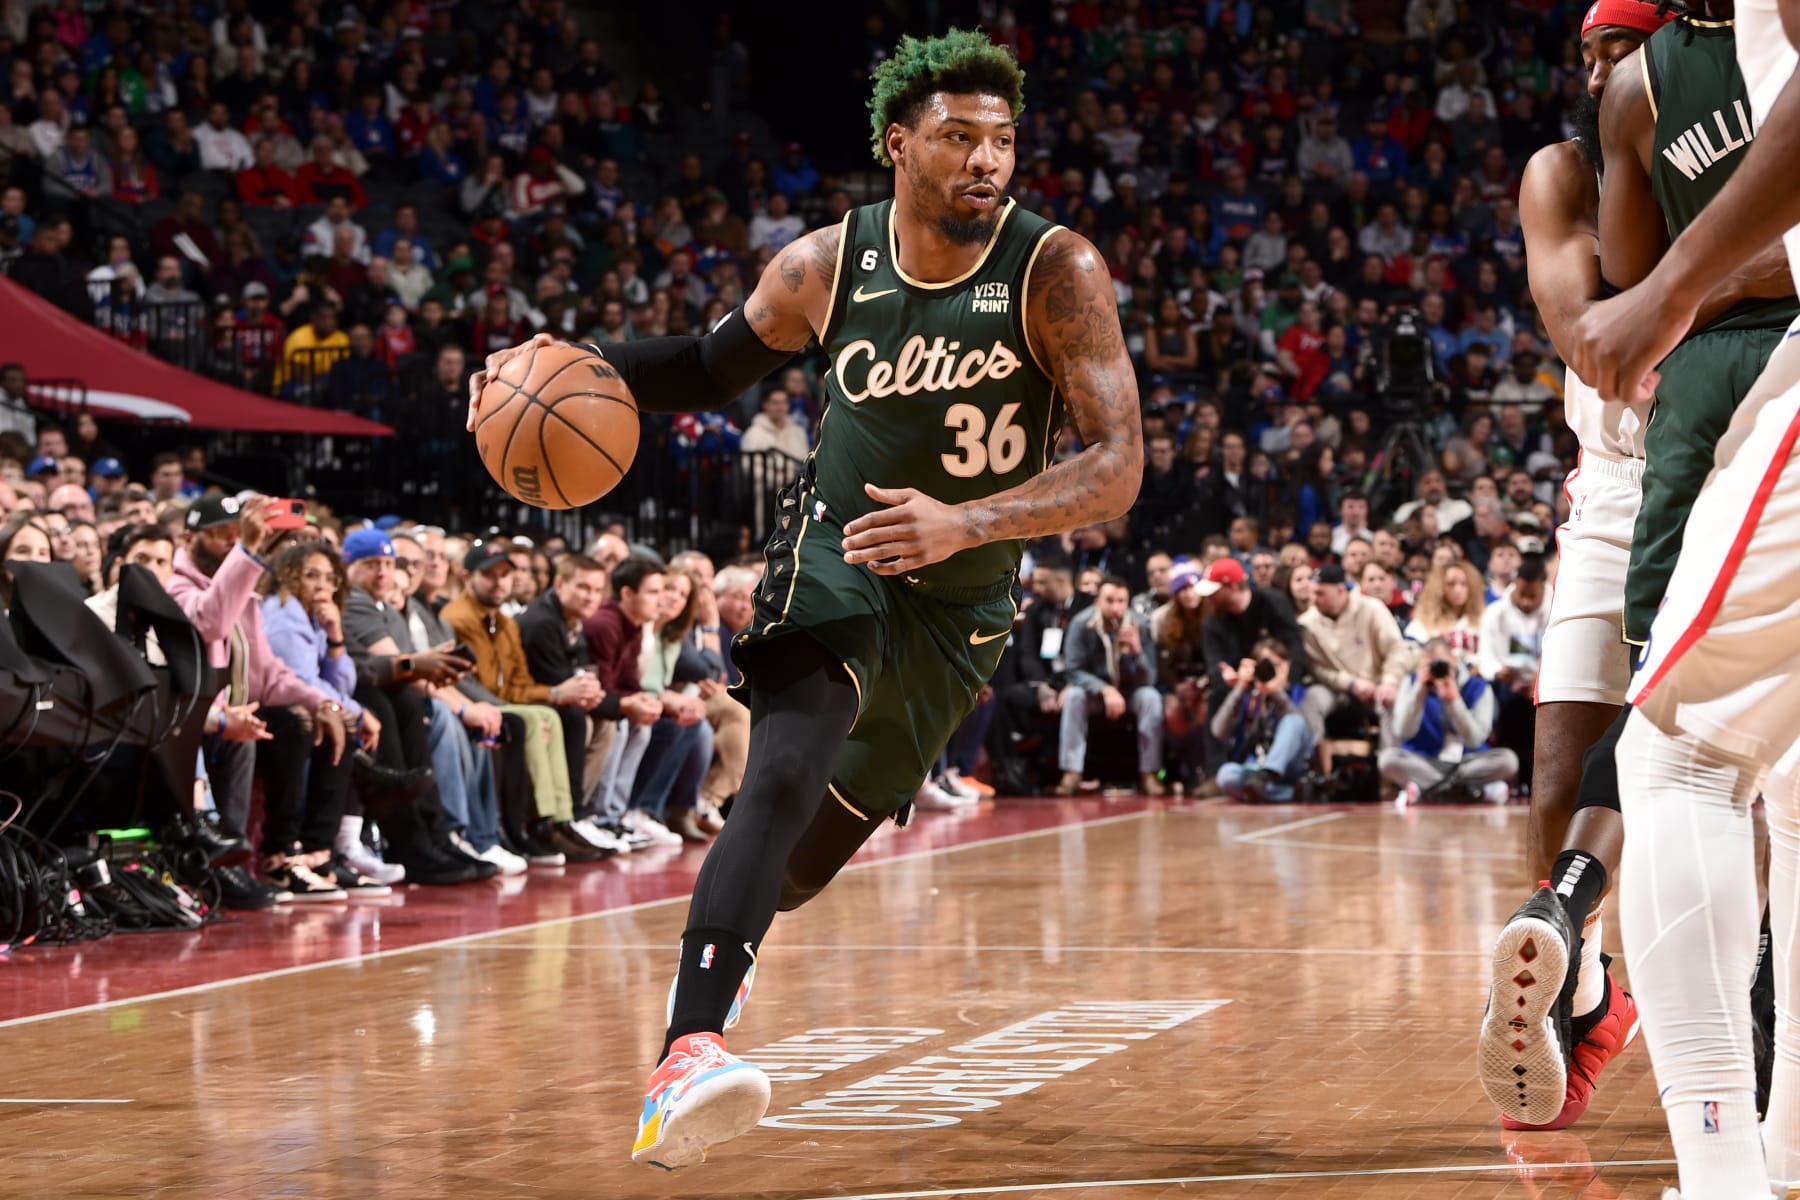 Marcus Smart fans fume over ESPN pic of altered blue hair